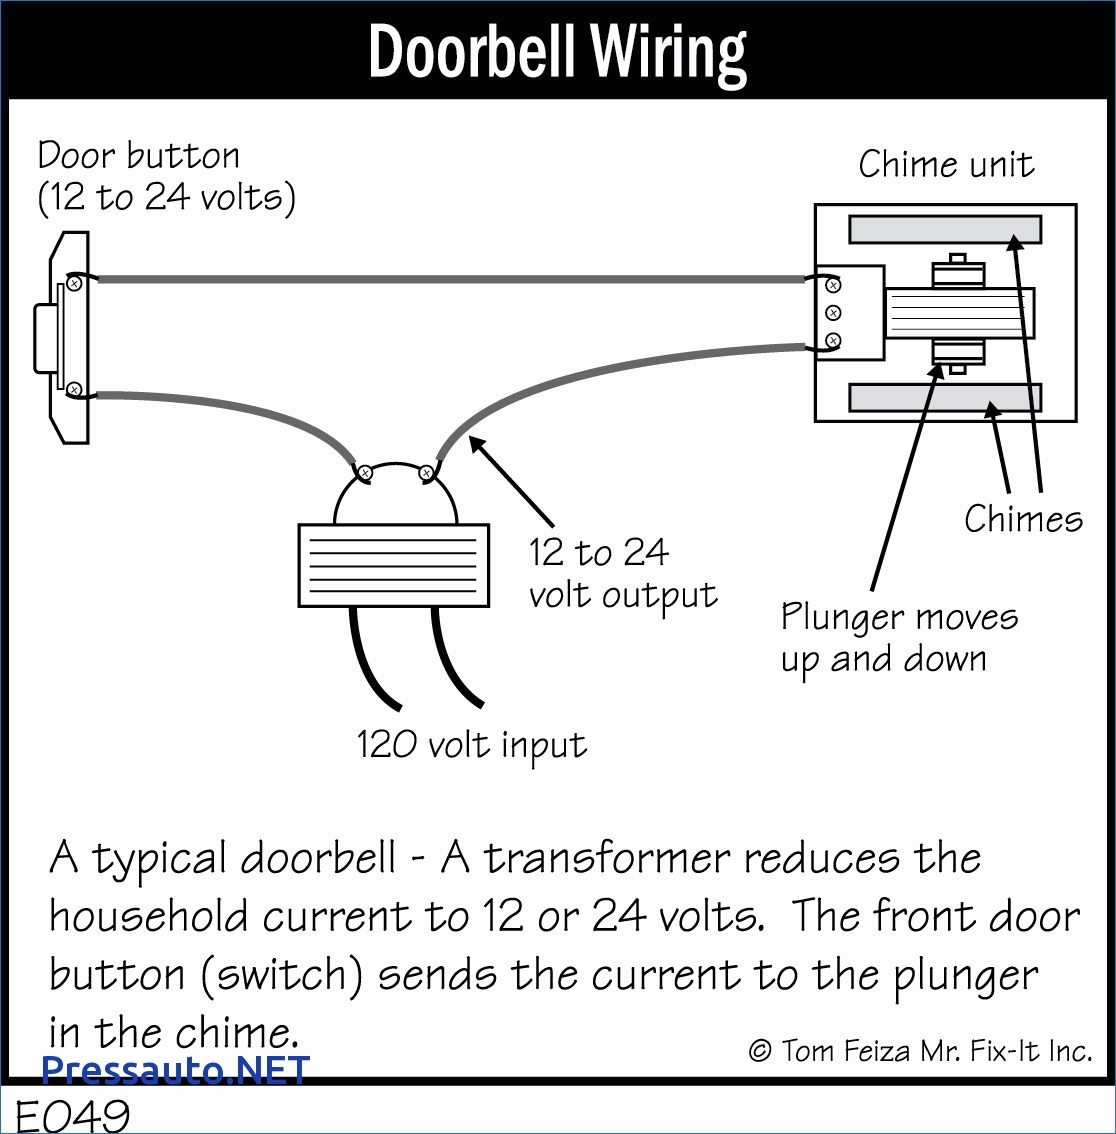 How To Wire A Transformer - How To Wire A Doorbell - Youtube - Doorbell